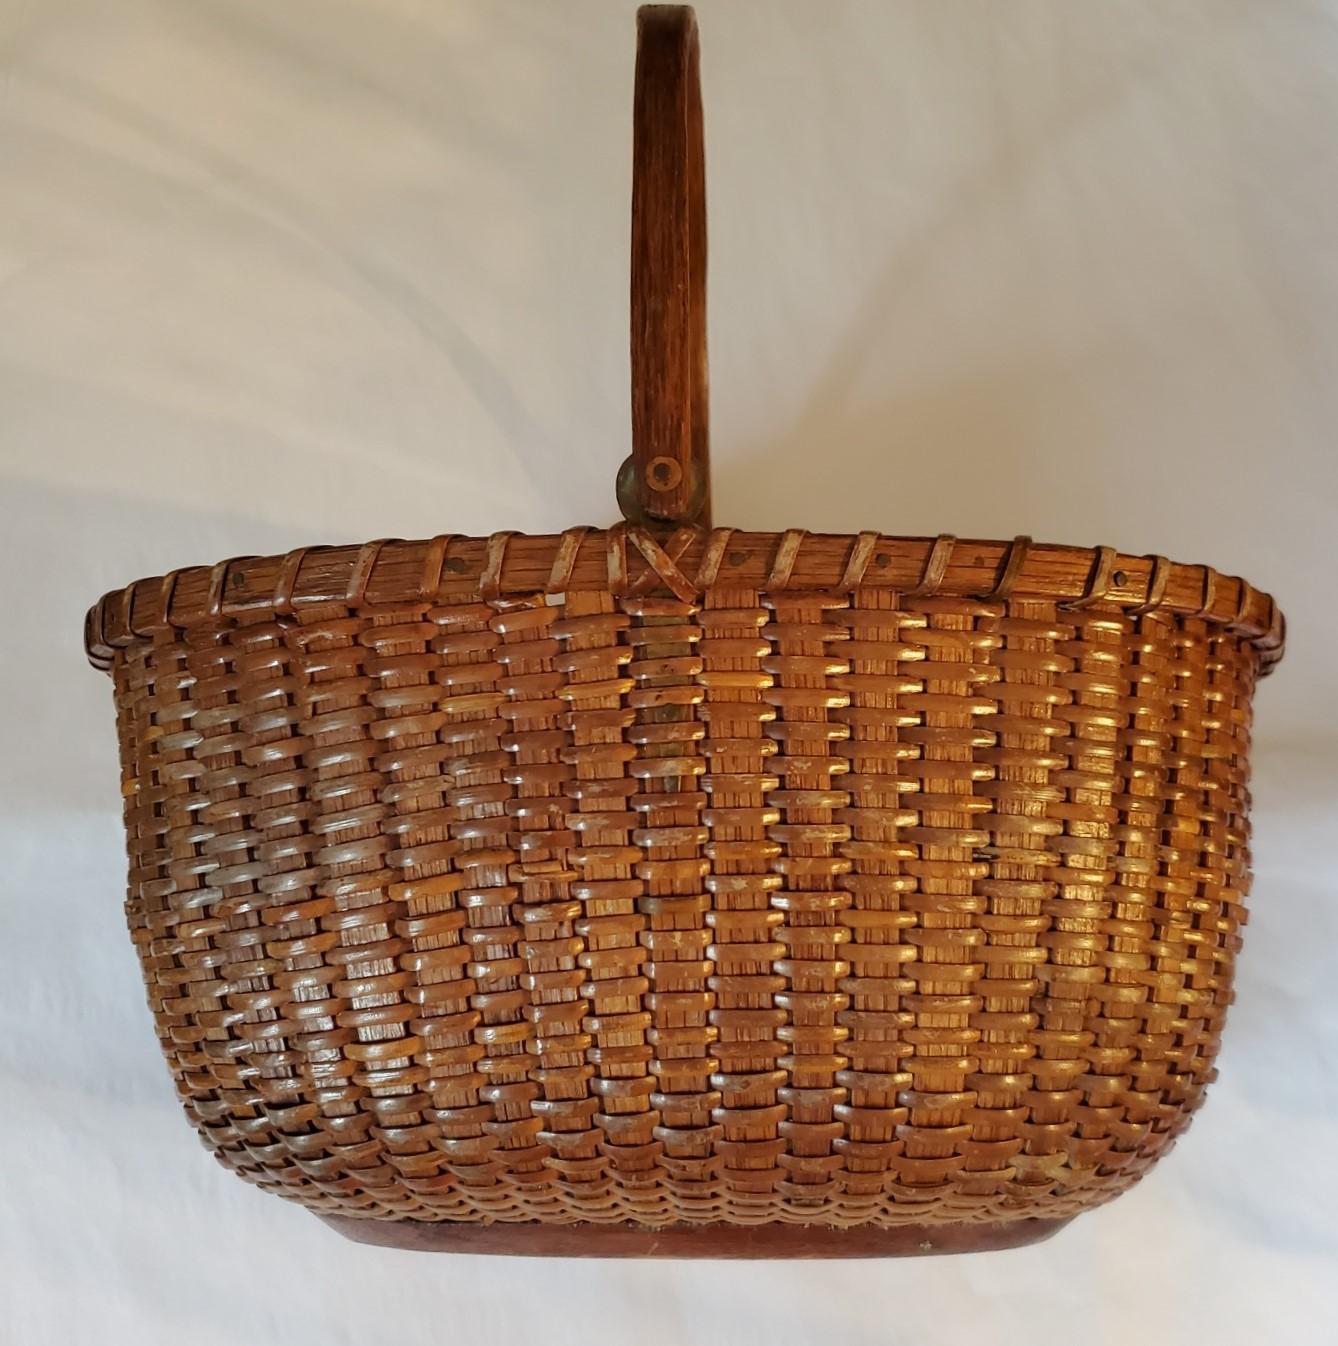 Antique Nantucket Basket by A.D. Williams (Nantucket: 1867 - 1927), circa 1890, an oval open Nantucket basket with cane weave on oak staves, with his distinctive carved swing handle attached to round brass ear extending beyond end of handle and